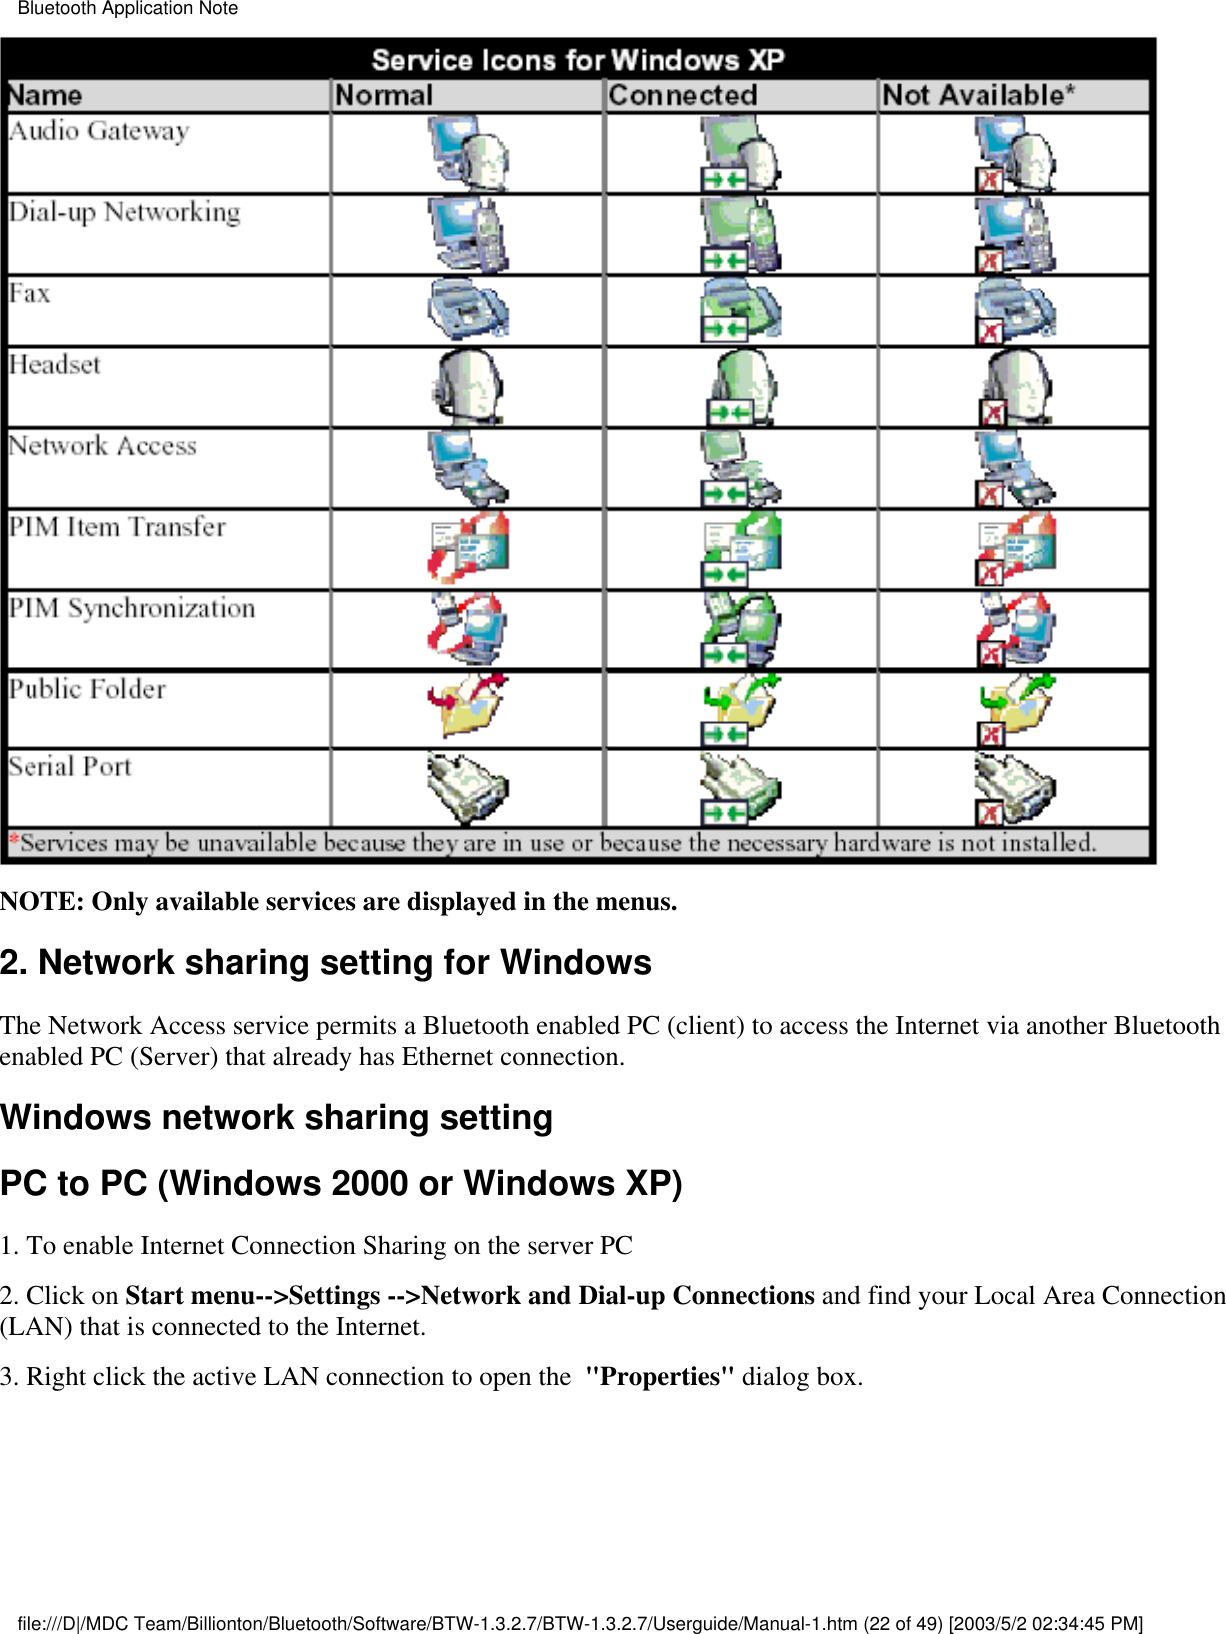 NOTE: Only available services are displayed in the menus.2. Network sharing setting for WindowsThe Network Access service permits a Bluetooth enabled PC (client) to access the Internet via another Bluetoothenabled PC (Server) that already has Ethernet connection. Windows network sharing settingPC to PC (Windows 2000 or Windows XP)1. To enable Internet Connection Sharing on the server PC2. Click on Start menu--&gt;Settings --&gt;Network and Dial-up Connections and find your Local Area Connection(LAN) that is connected to the Internet.3. Right click the active LAN connection to open the  &quot;Properties&quot; dialog box.Bluetooth Application Notefile:///D|/MDC Team/Billionton/Bluetooth/Software/BTW-1.3.2.7/BTW-1.3.2.7/Userguide/Manual-1.htm (22 of 49) [2003/5/2 02:34:45 PM]